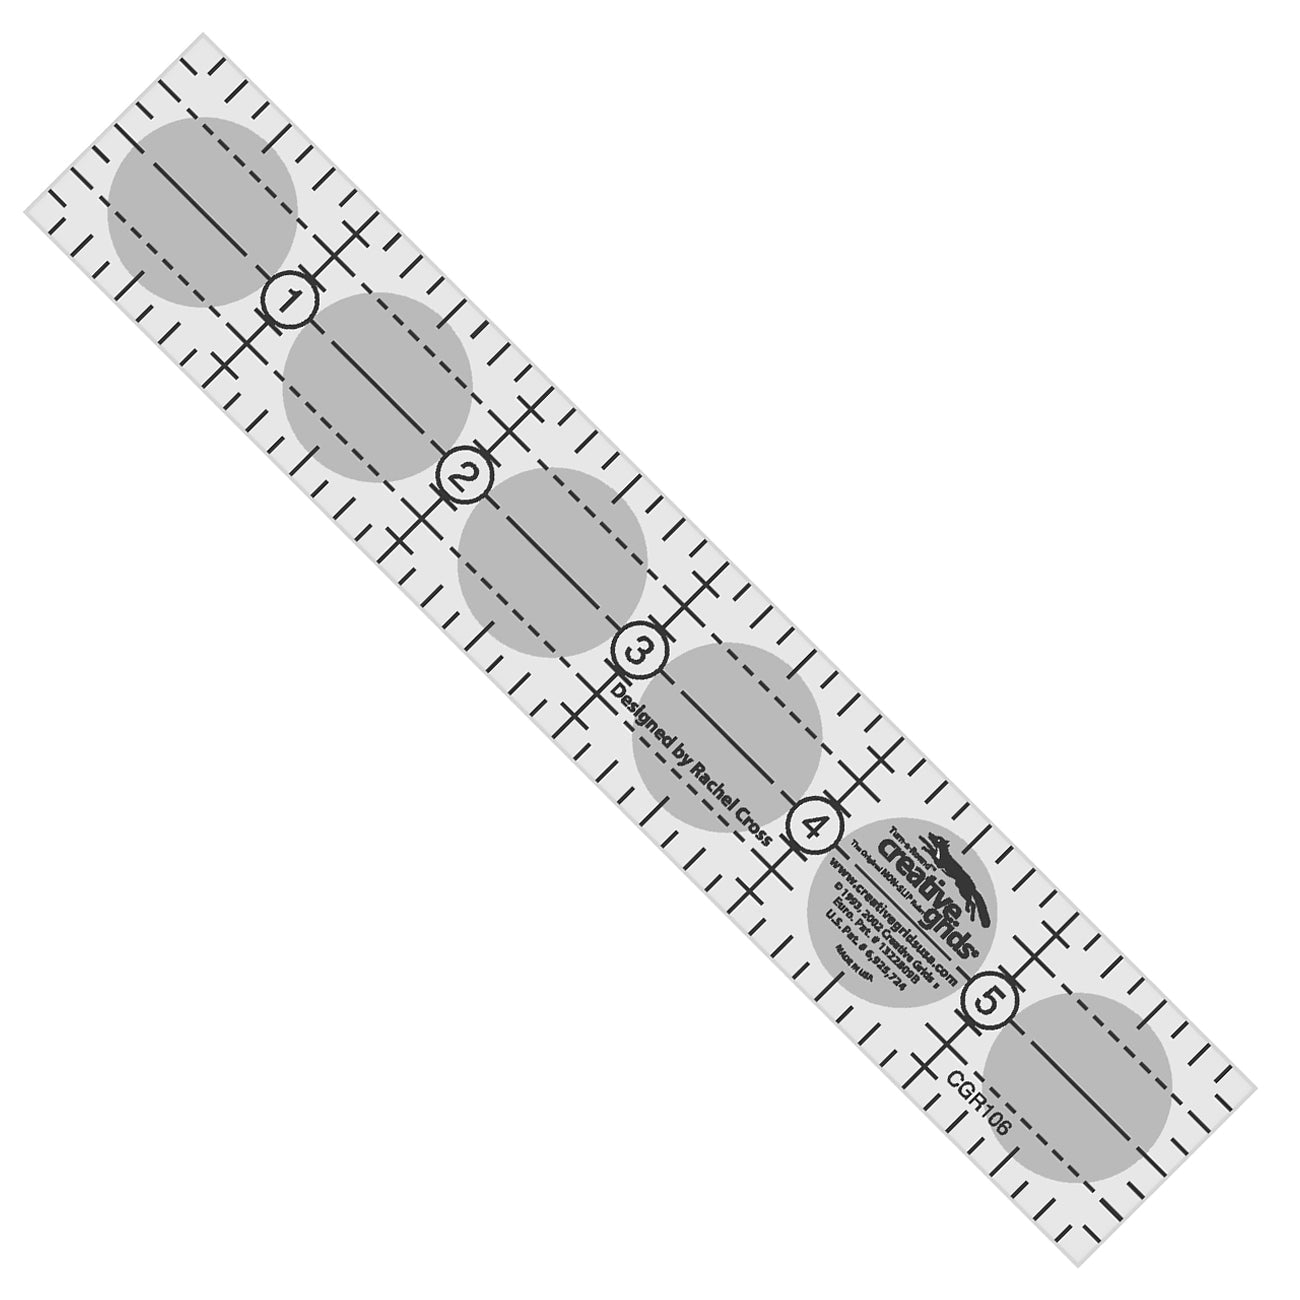 Quilt Ruler Upgrade Kit for 12, 12-1/2, 24, or 24-1/2 Inch Acrylic Rul